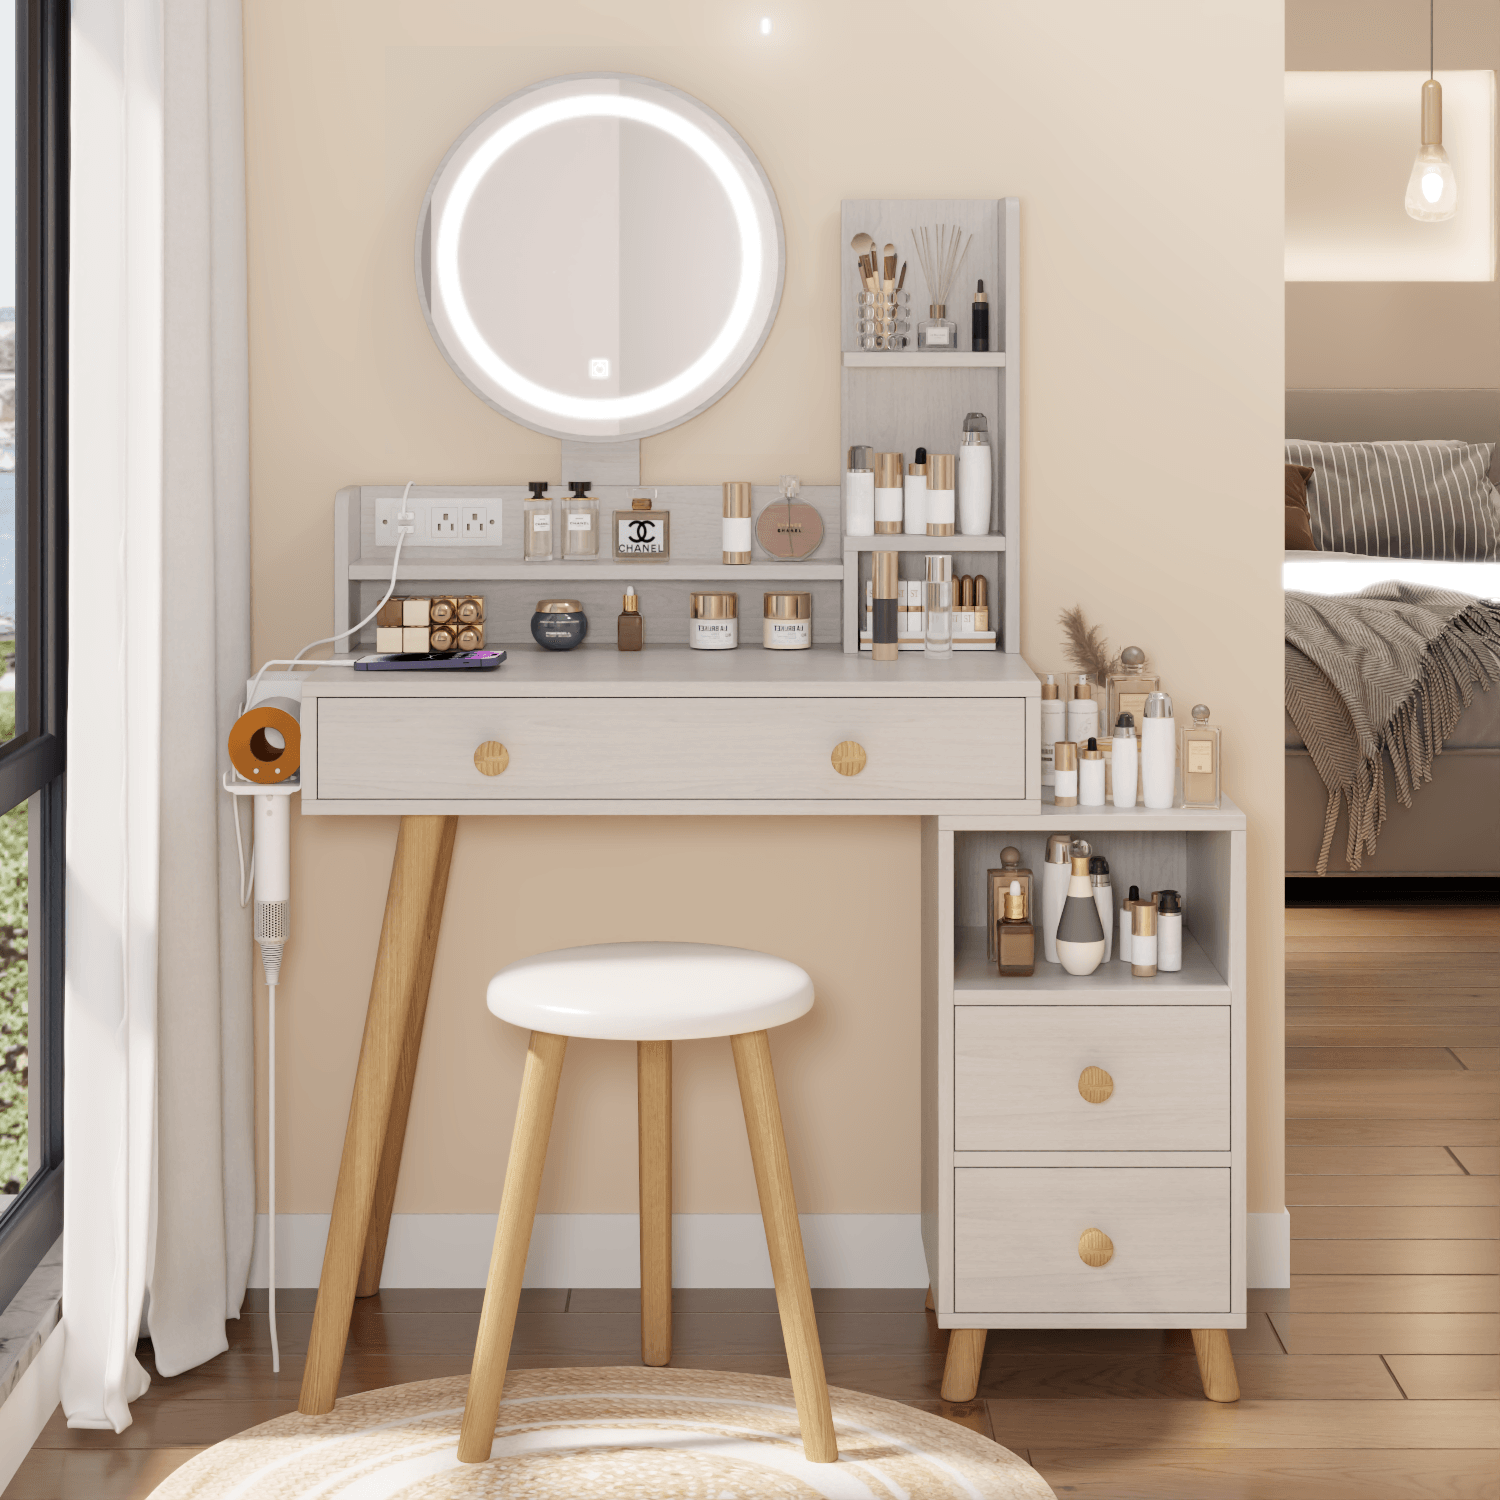 🆓🚛 Round Mirror Bedside Cabinet Vanity Table + Cushioned Stool, With 2 Ac Power + 2 Usb Socket, 17" Diameter Led Mirror, Touch Control, 3-Color, Brightness Adjustable, Large Desktop, Multi-Layer Storage